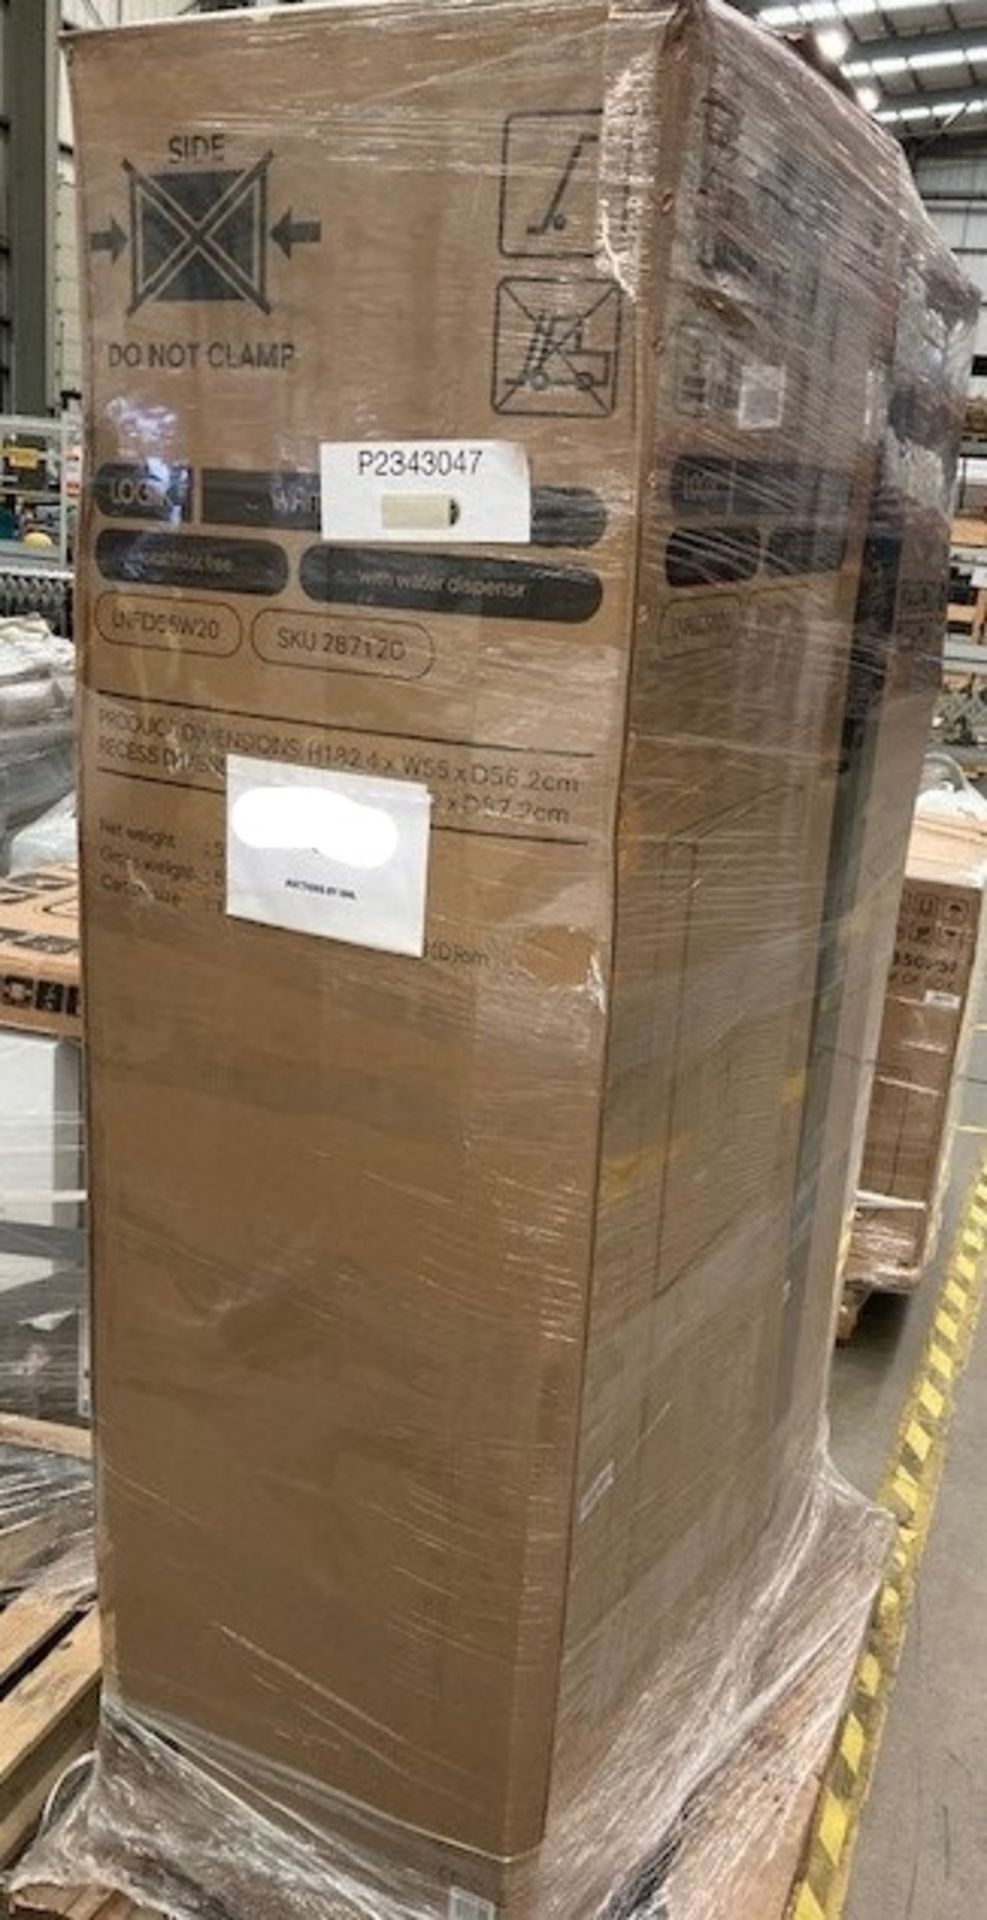 Pallet of 1 KENWOOD BUILT-IN 2 DOOR REFRIGERATION. Latest selling price £319.00 - Image 2 of 2